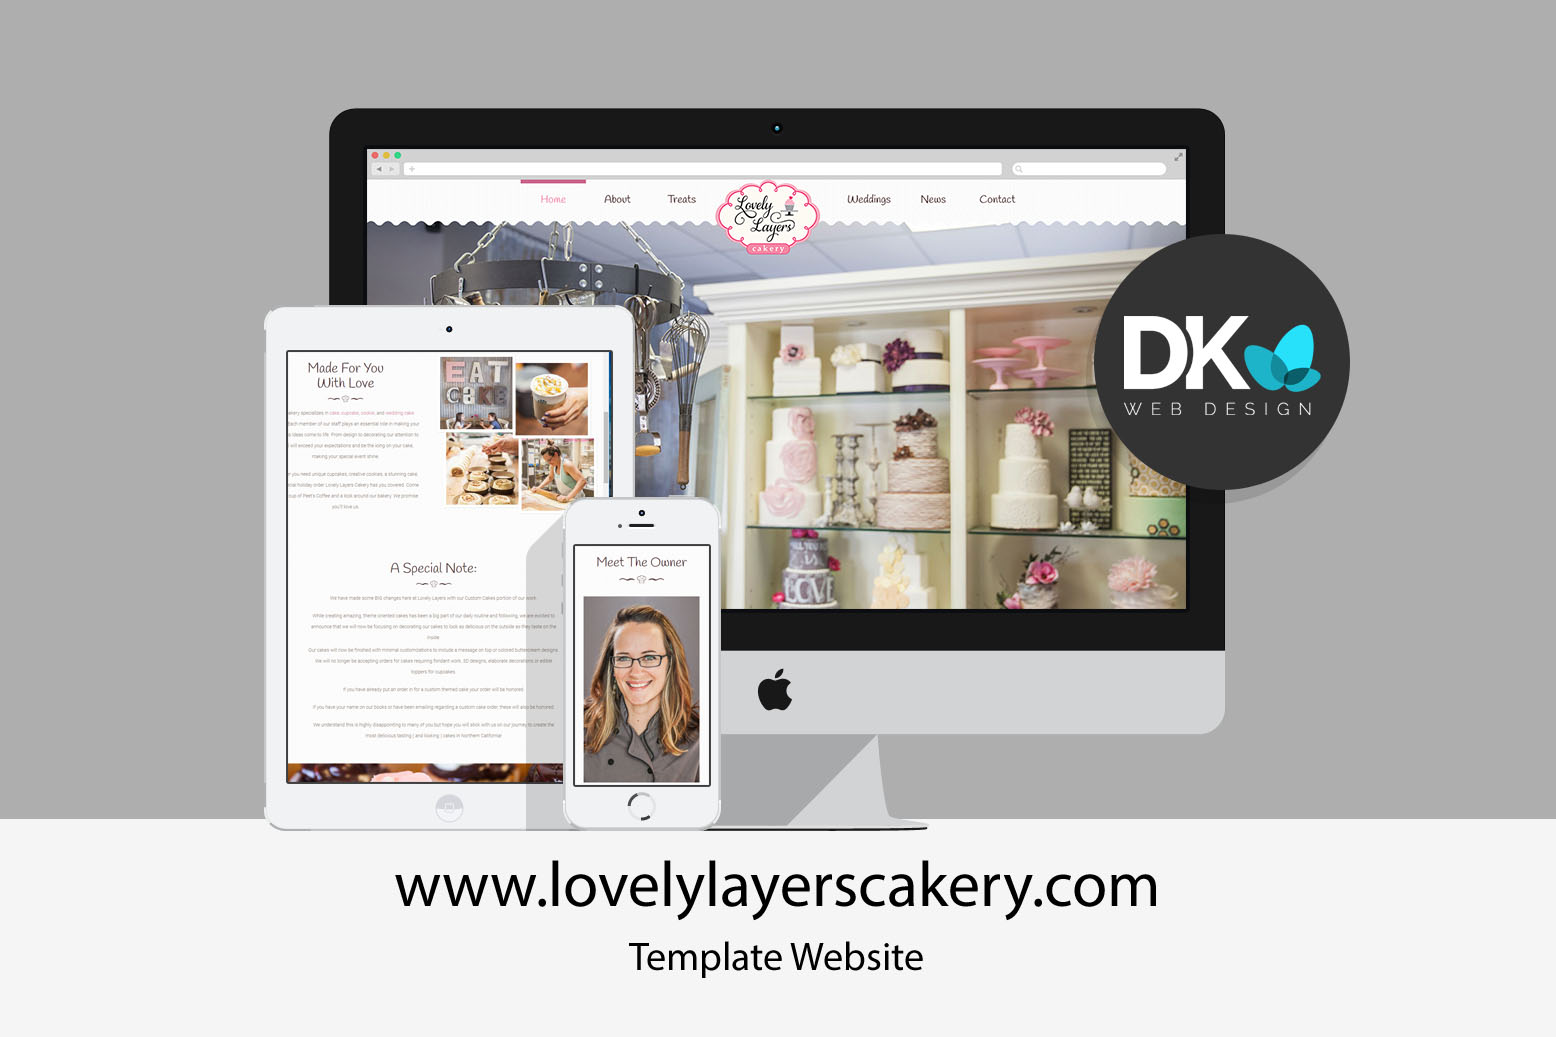 Screenshot of the Lovely Layers Cakery website